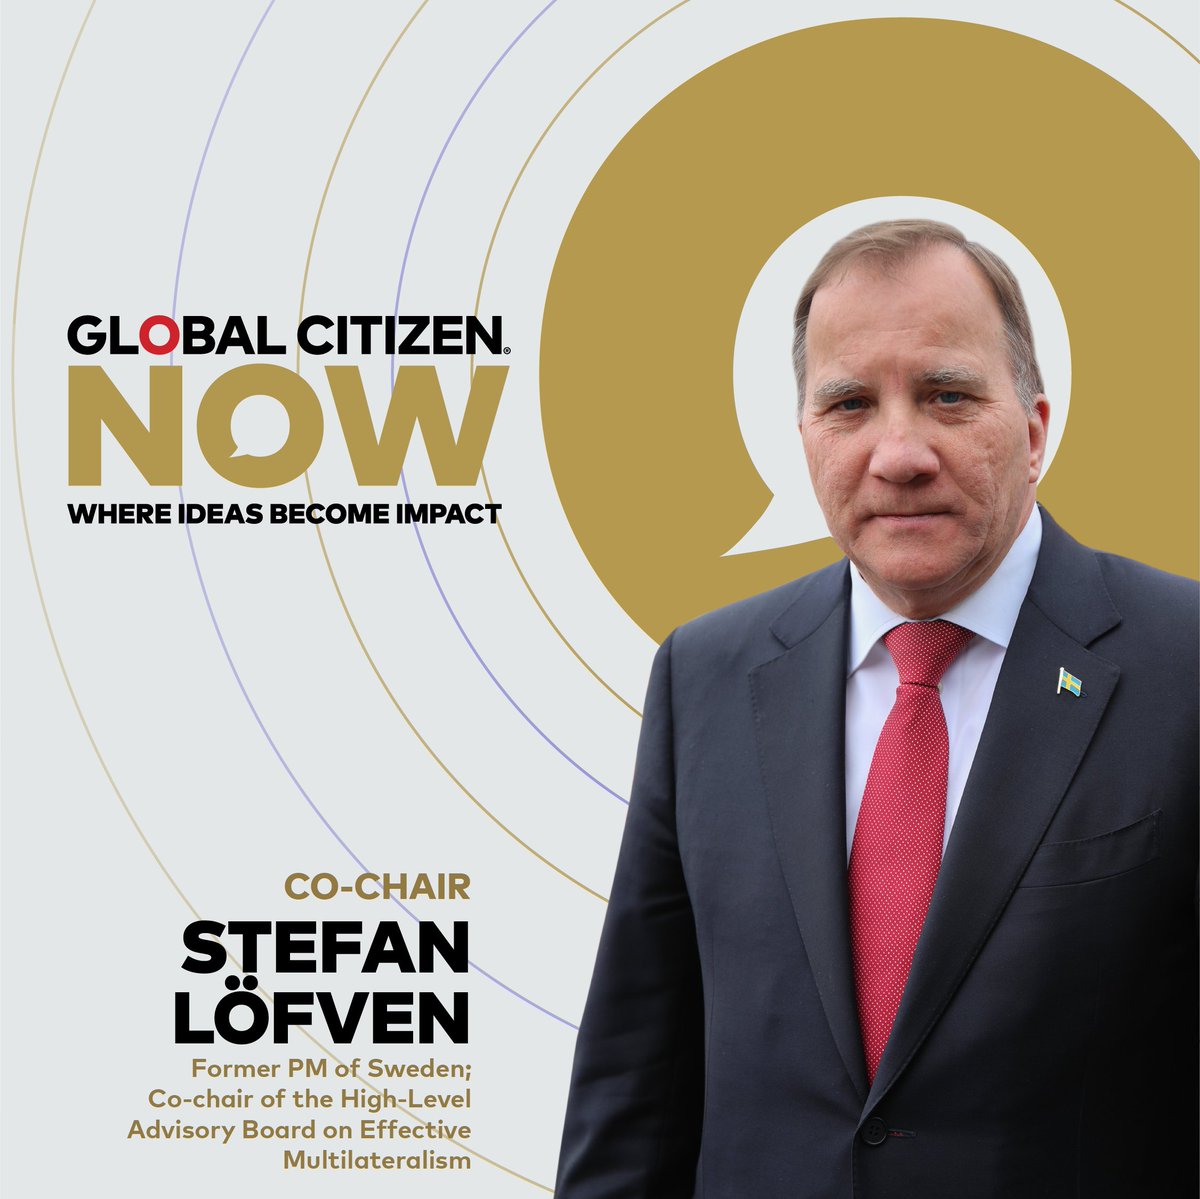 Former Prime Minister of Sweden Stefan Löfven will take the stage with other inspiring leaders for our One World Together panel at #GlobalCitizenNOW.